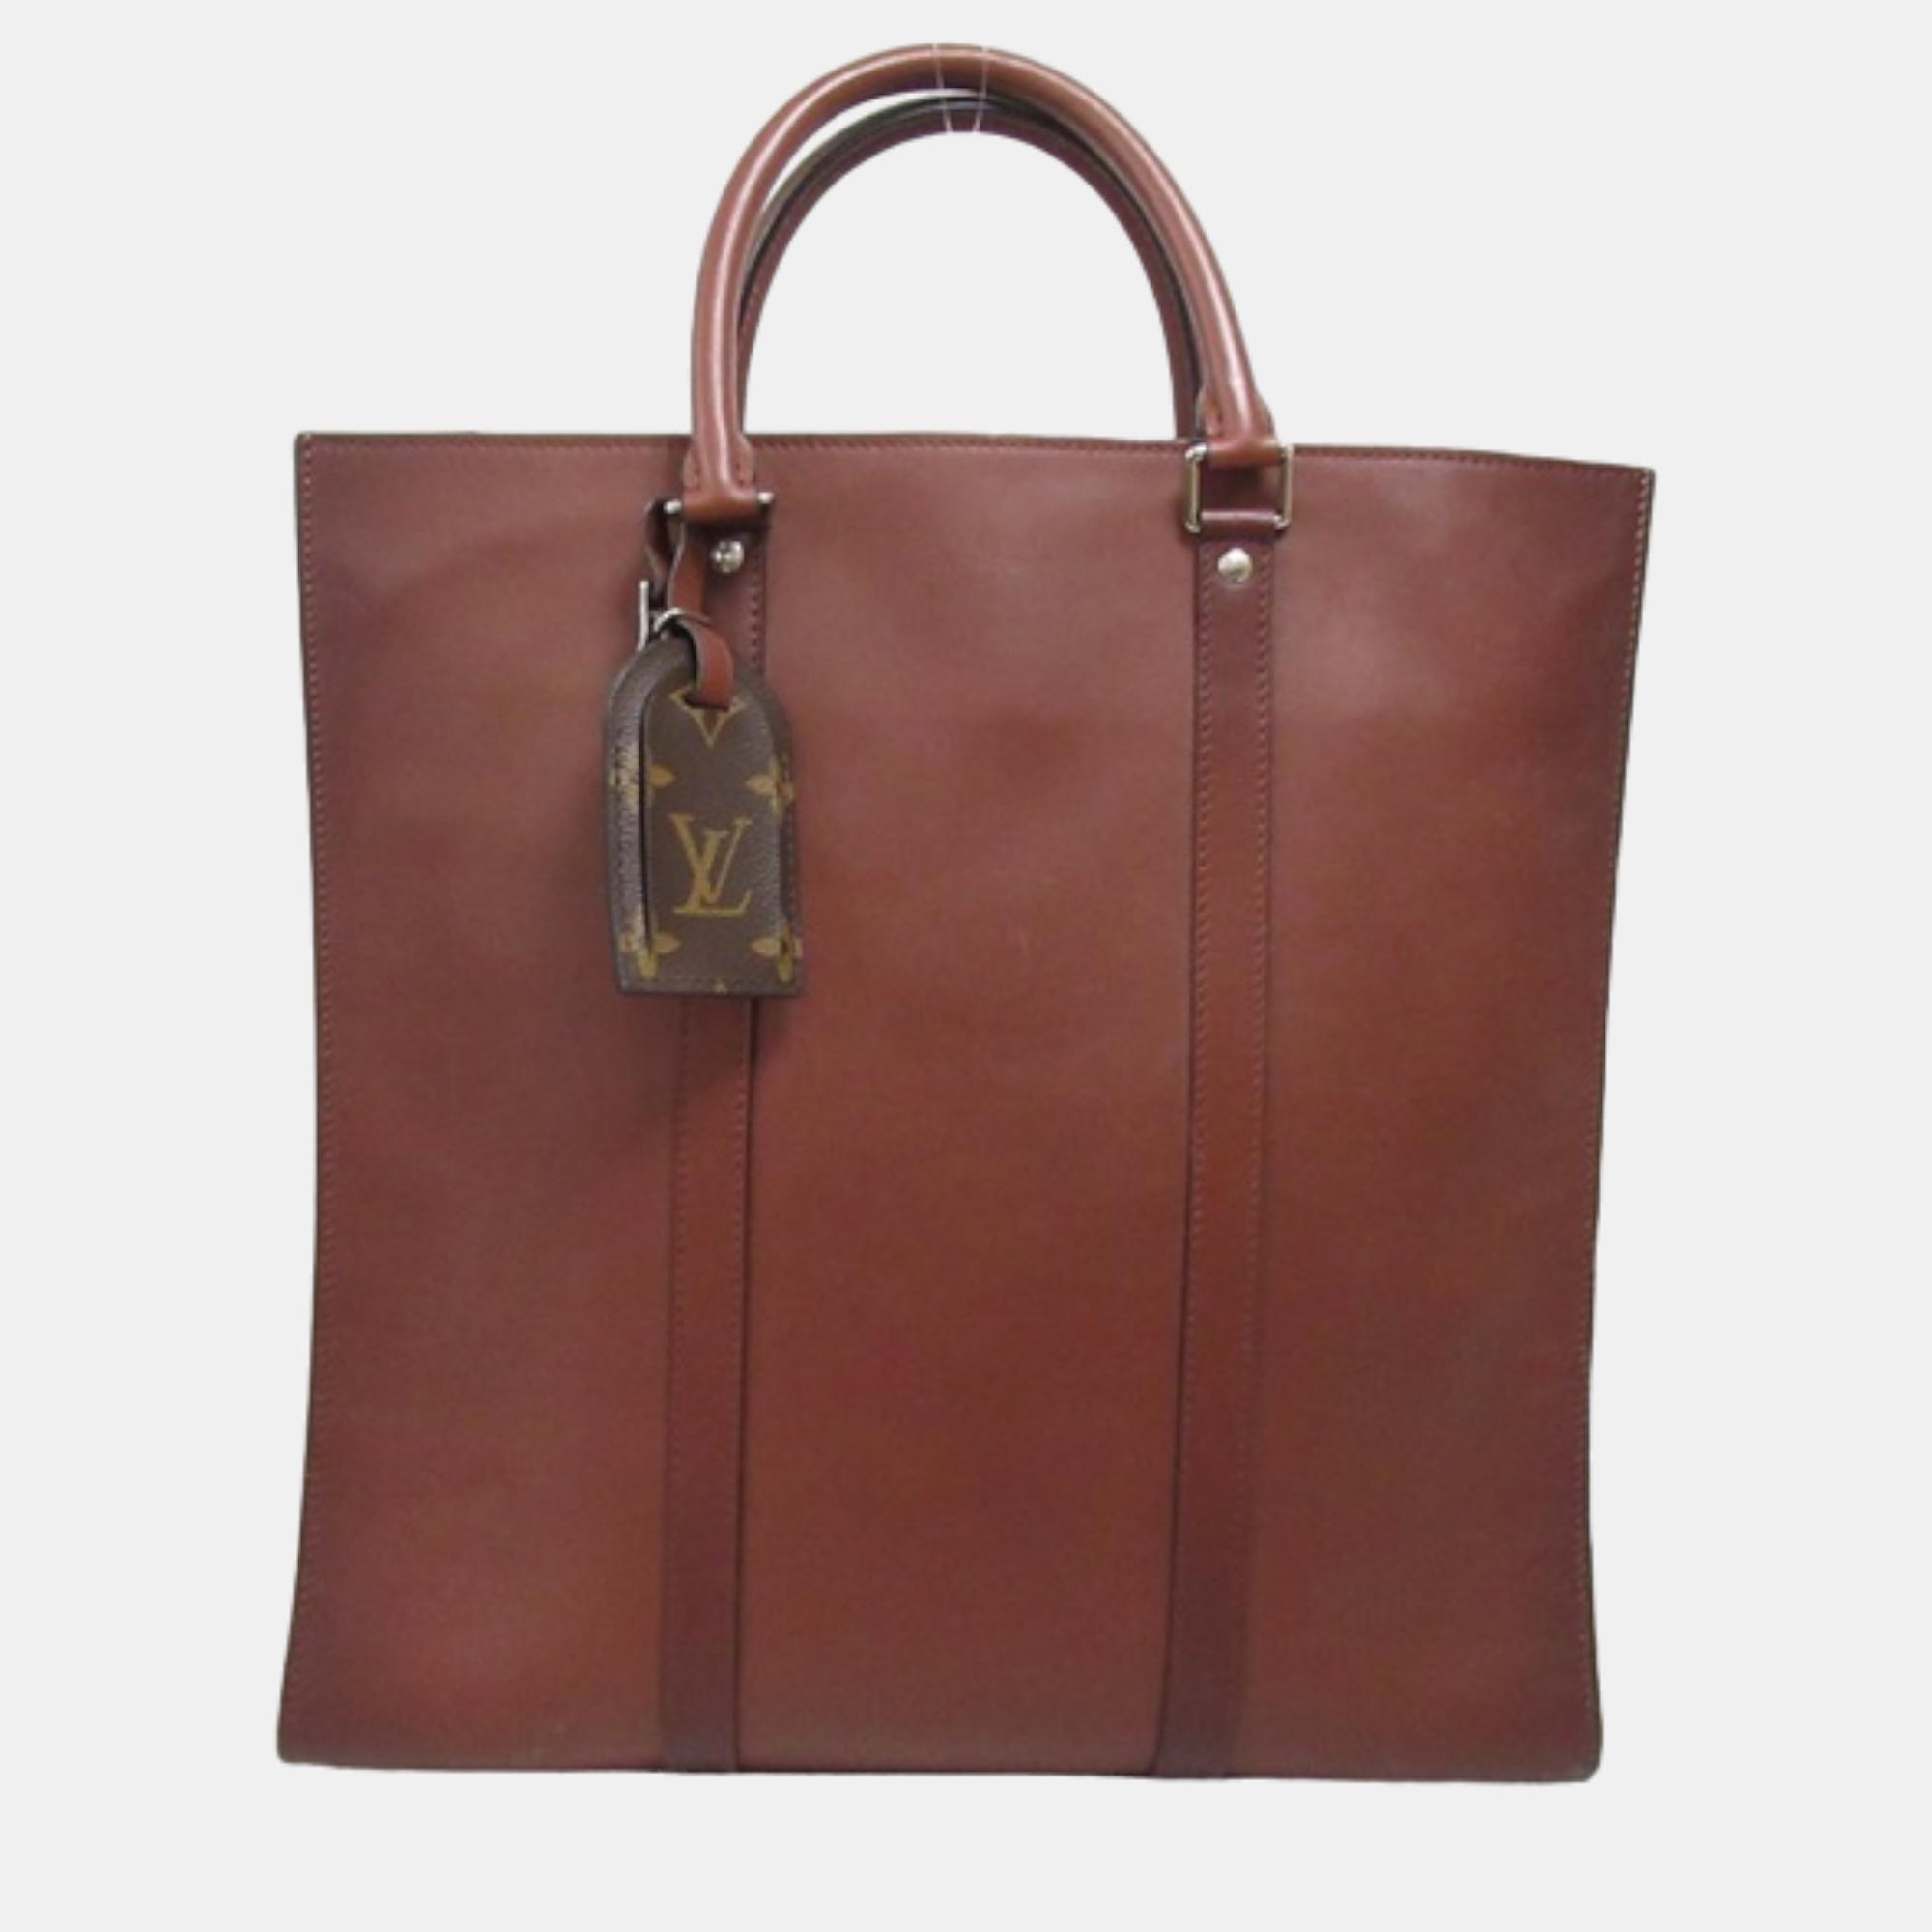 Pre-owned Louis Vuitton Brown Leather Taurillon Sac Plat Tote